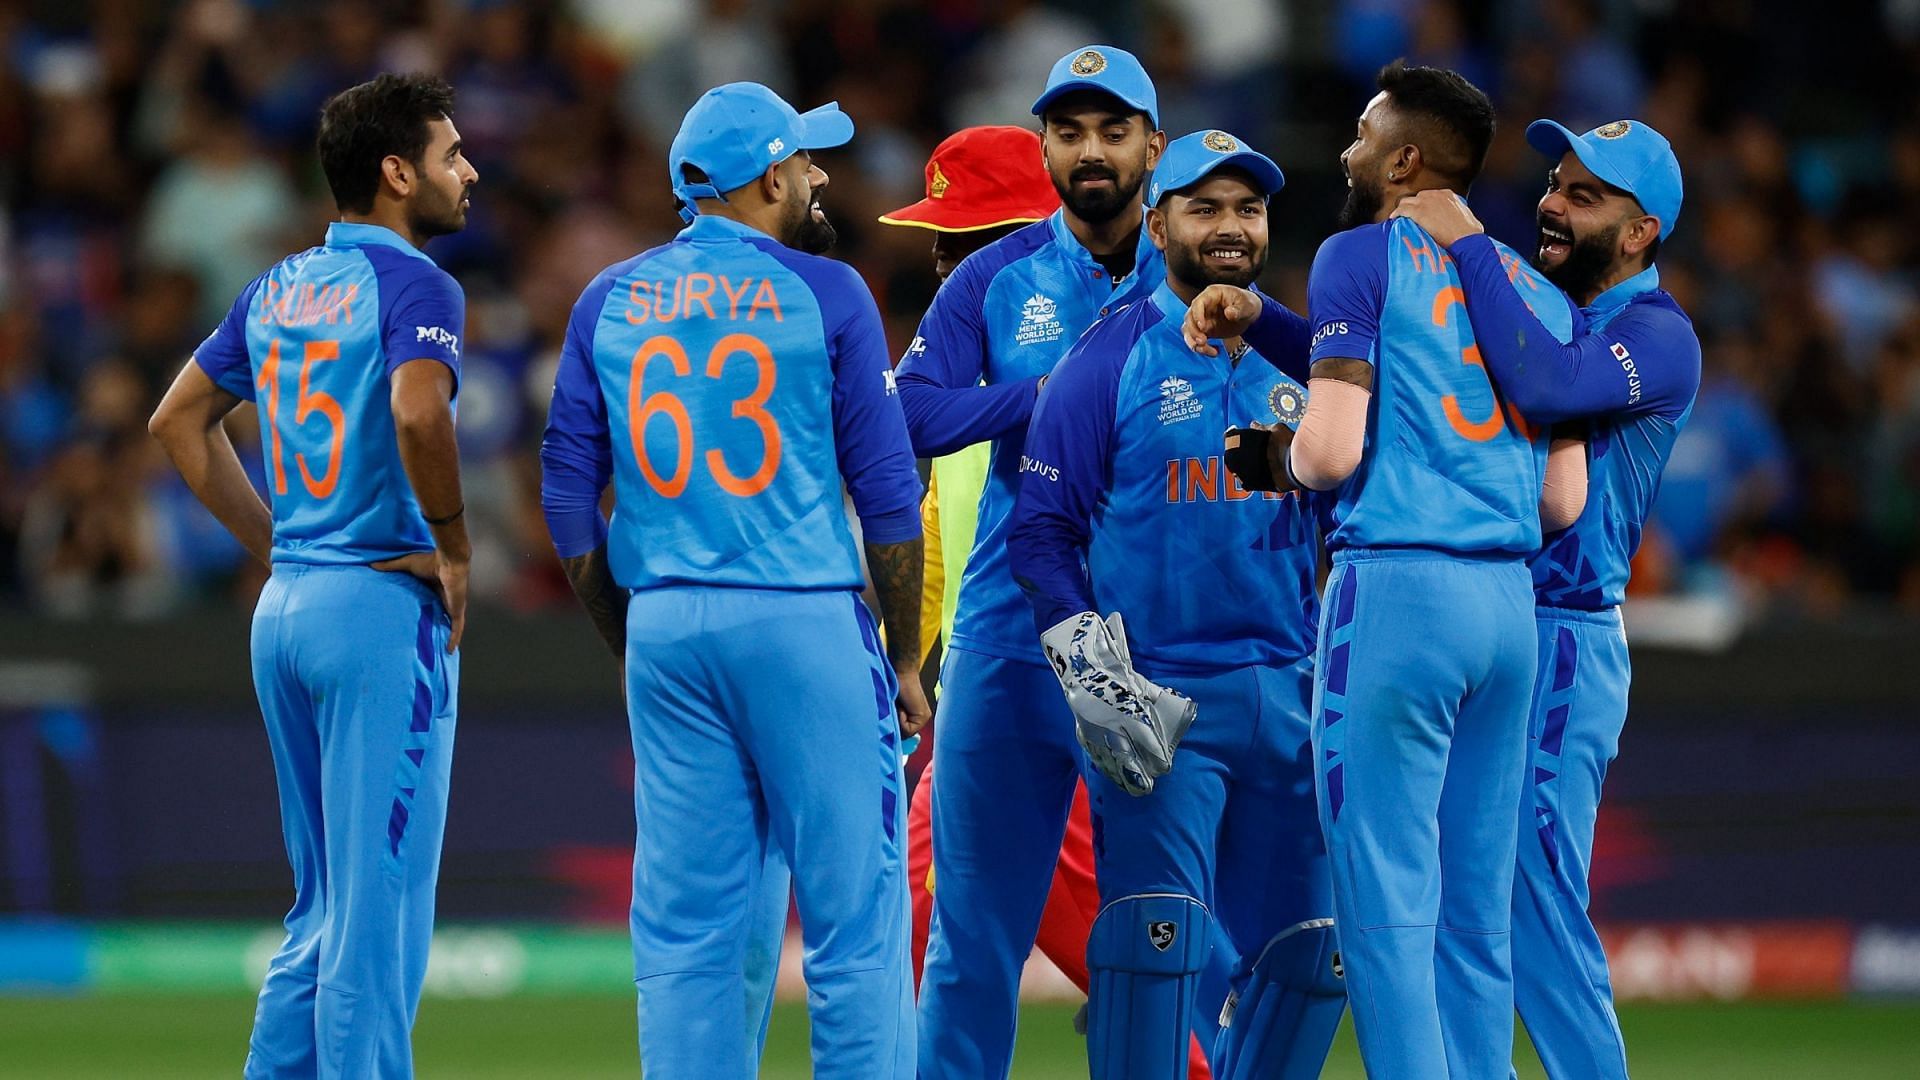 Can India make it to the Finals of the ICC Men